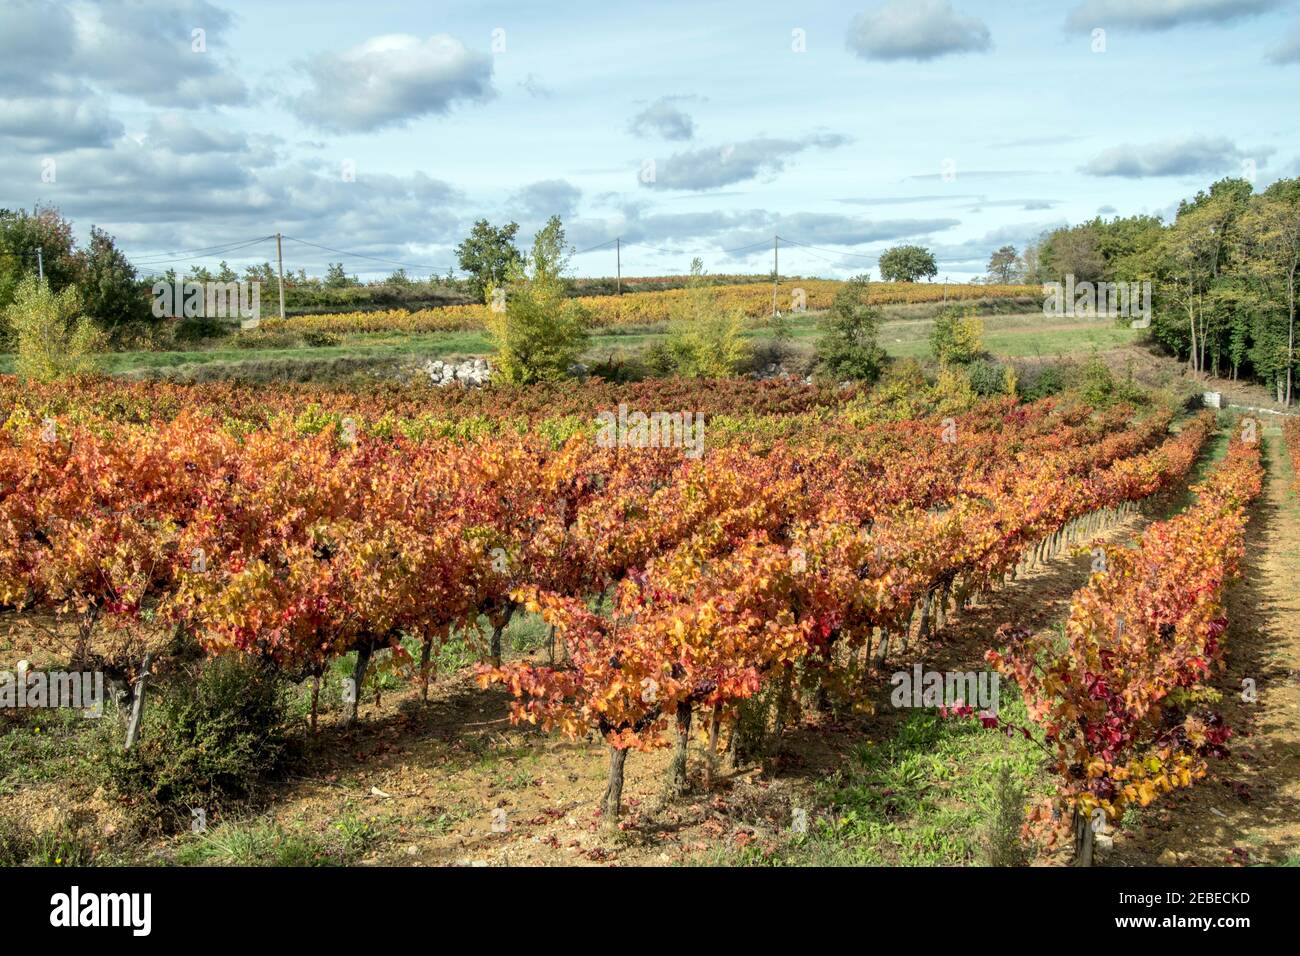 Vineyards - Same view, different seasons - Languedoc, southern France. Stock Photo